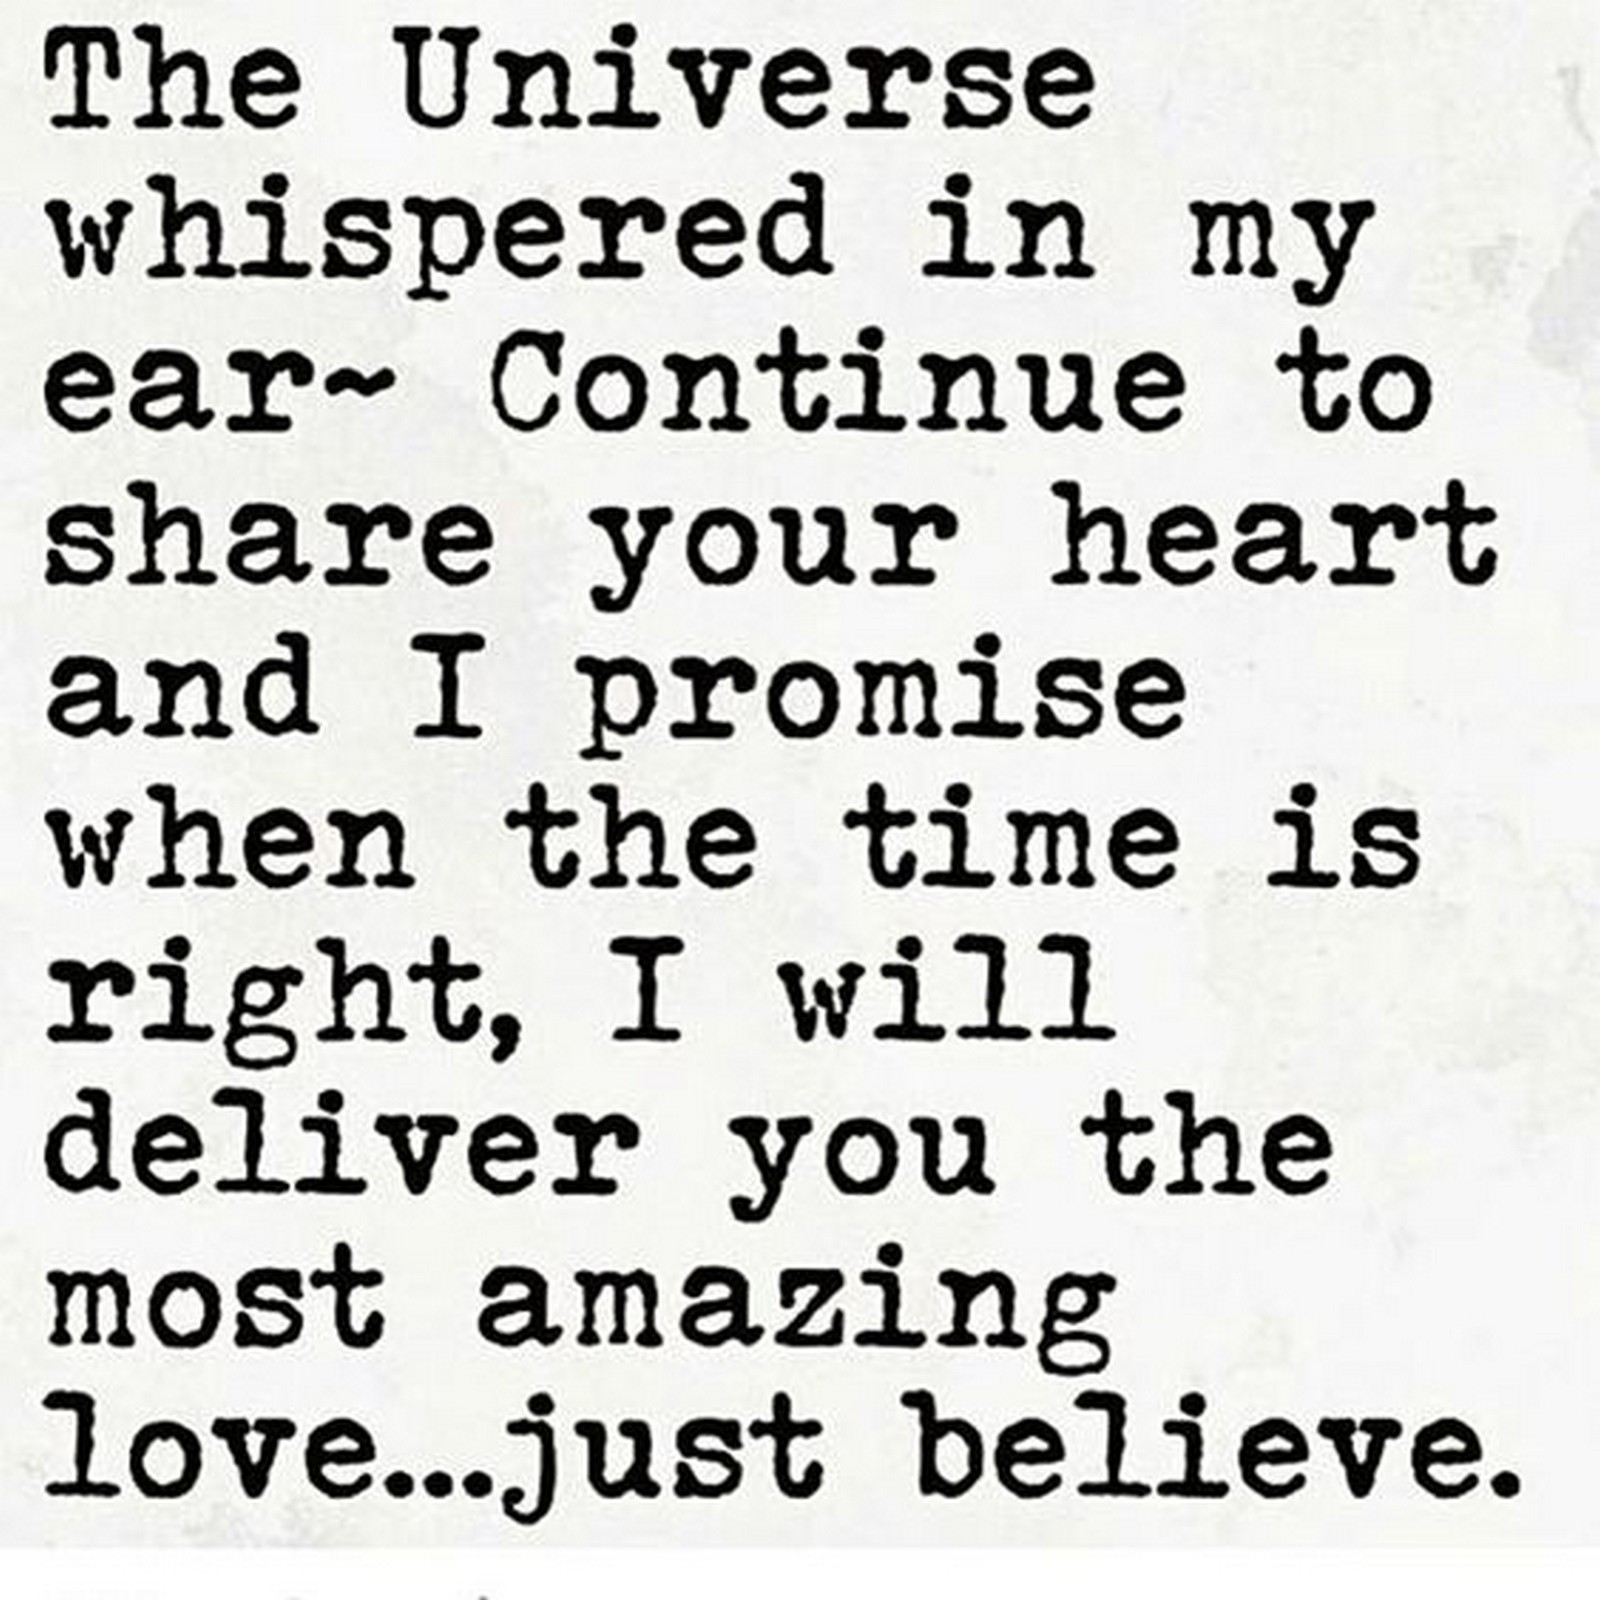 55 Romantic Quotes - "The Universe whispered in my ear ~ continue to share your heart and I promise when the time is right, I will deliver you the most amazing love...just believe."